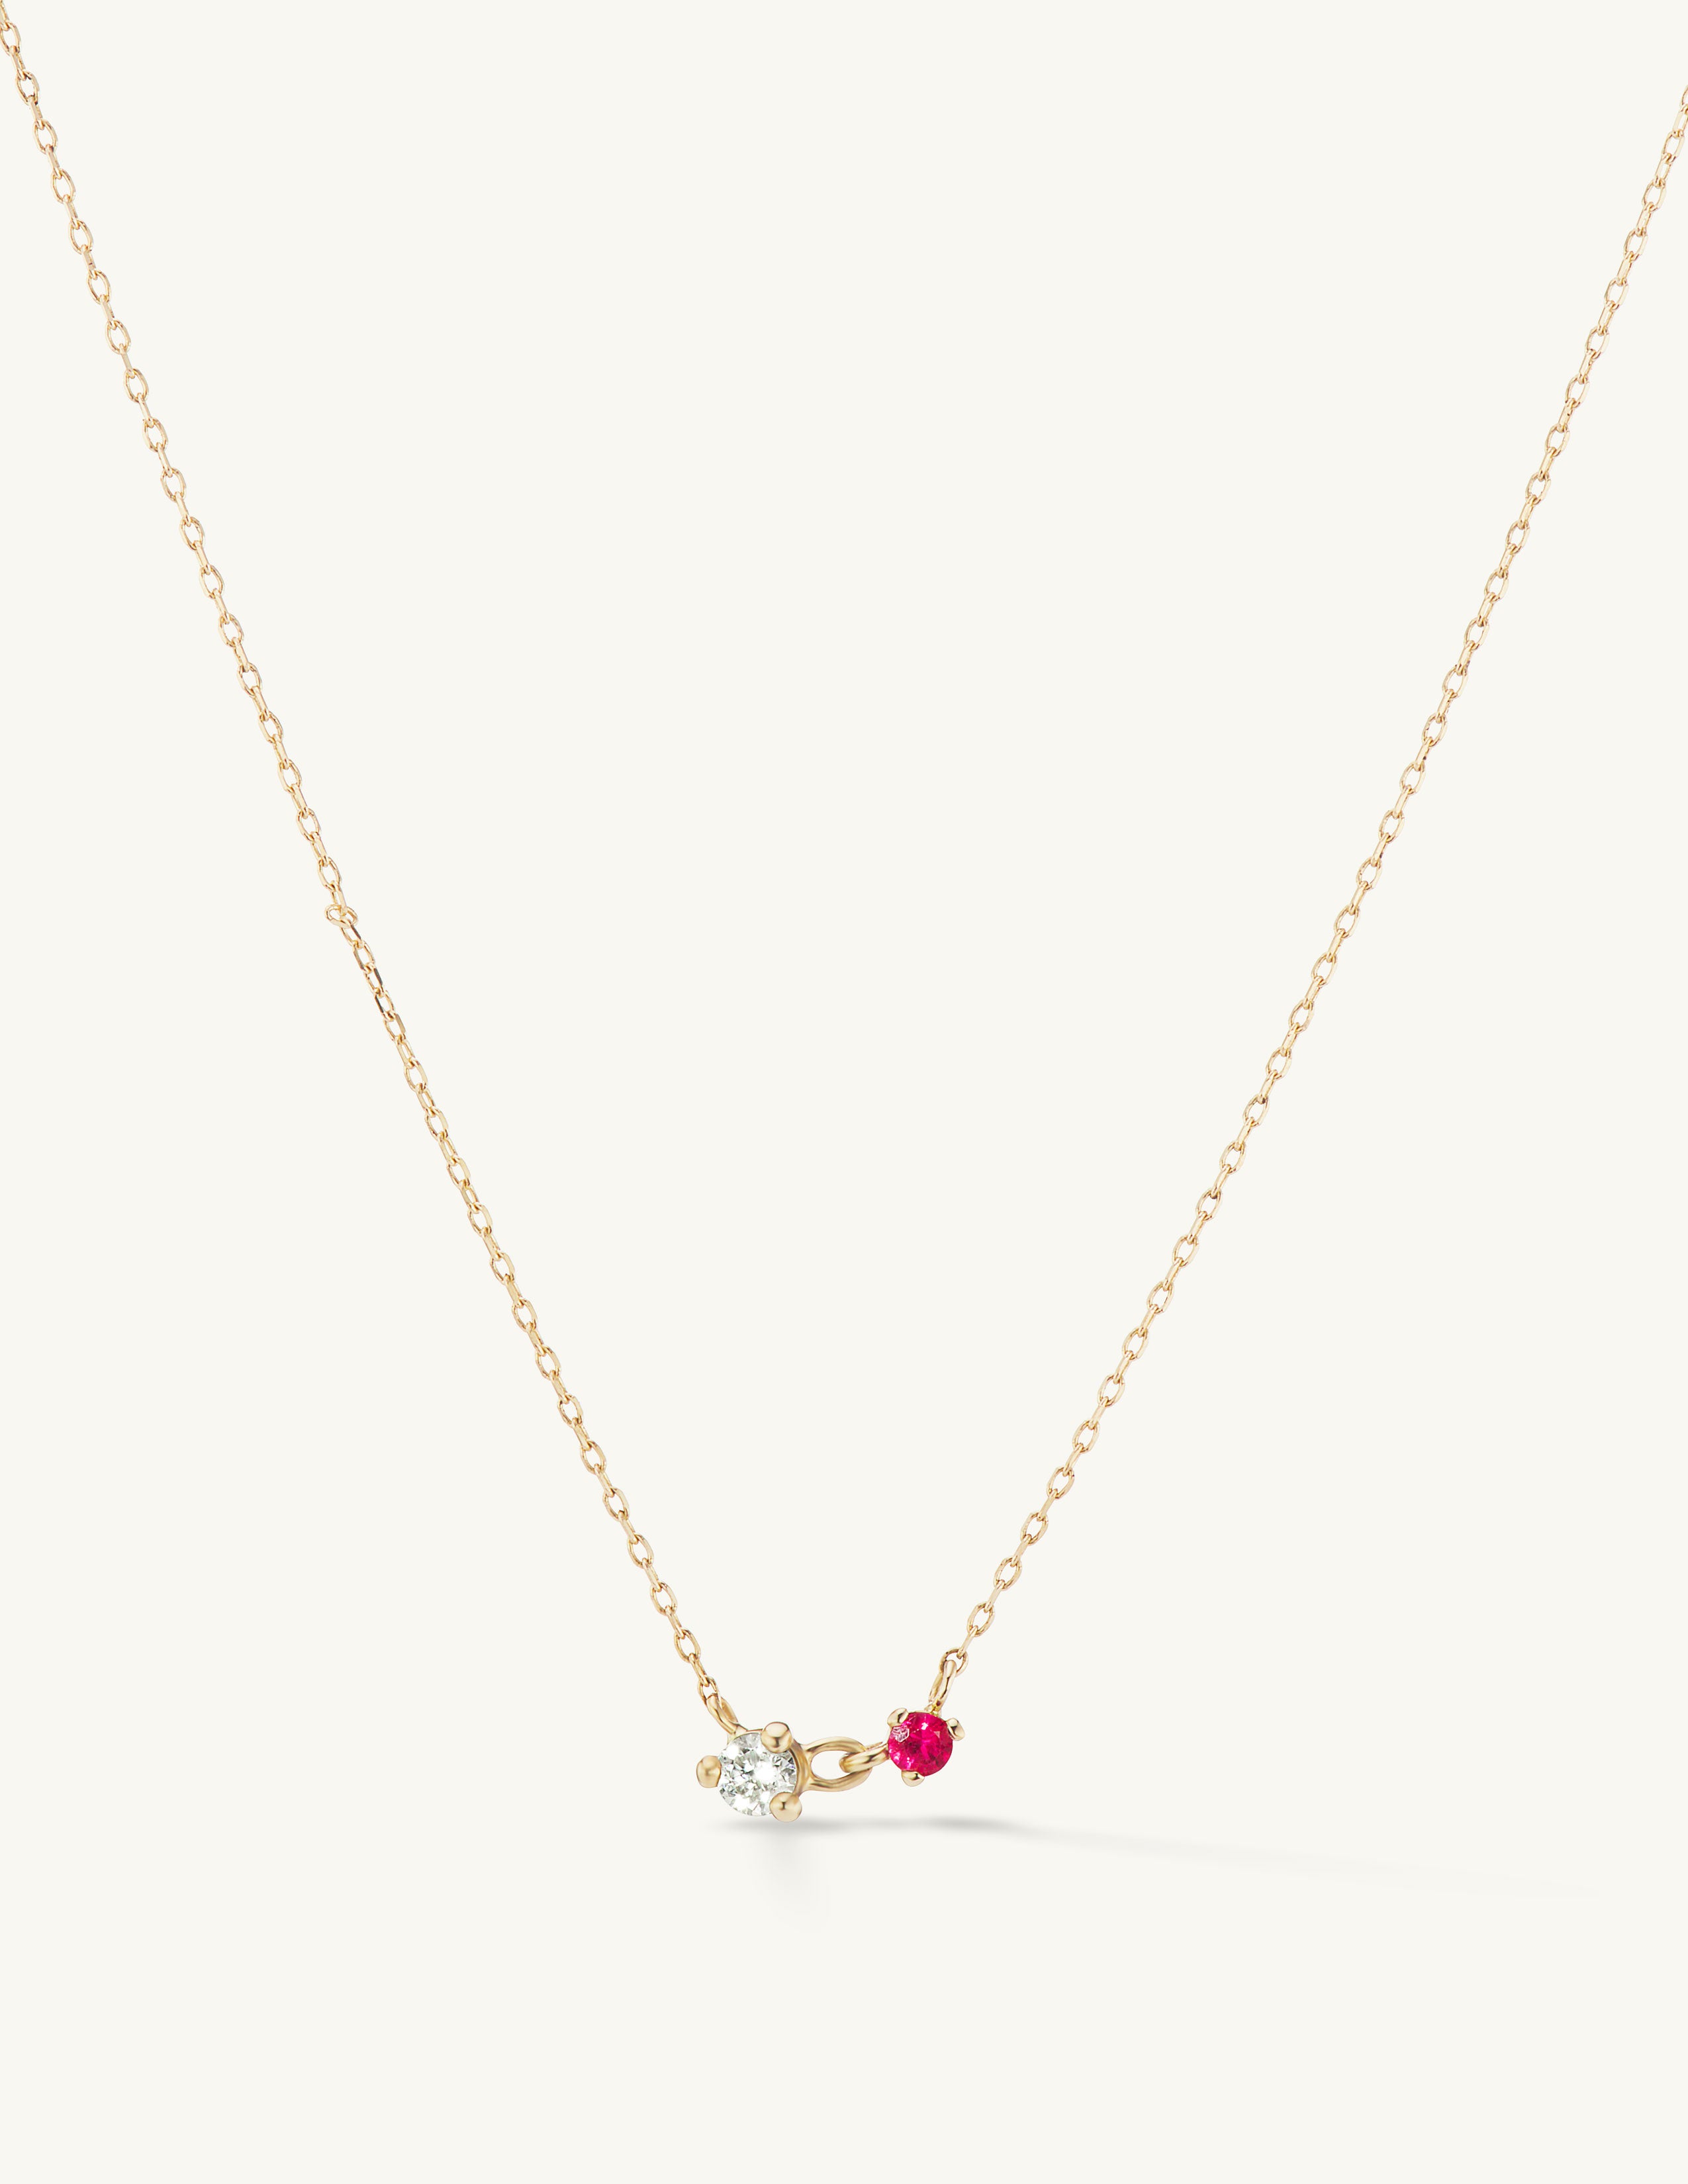 Diamond and Ruby Twin Necklace